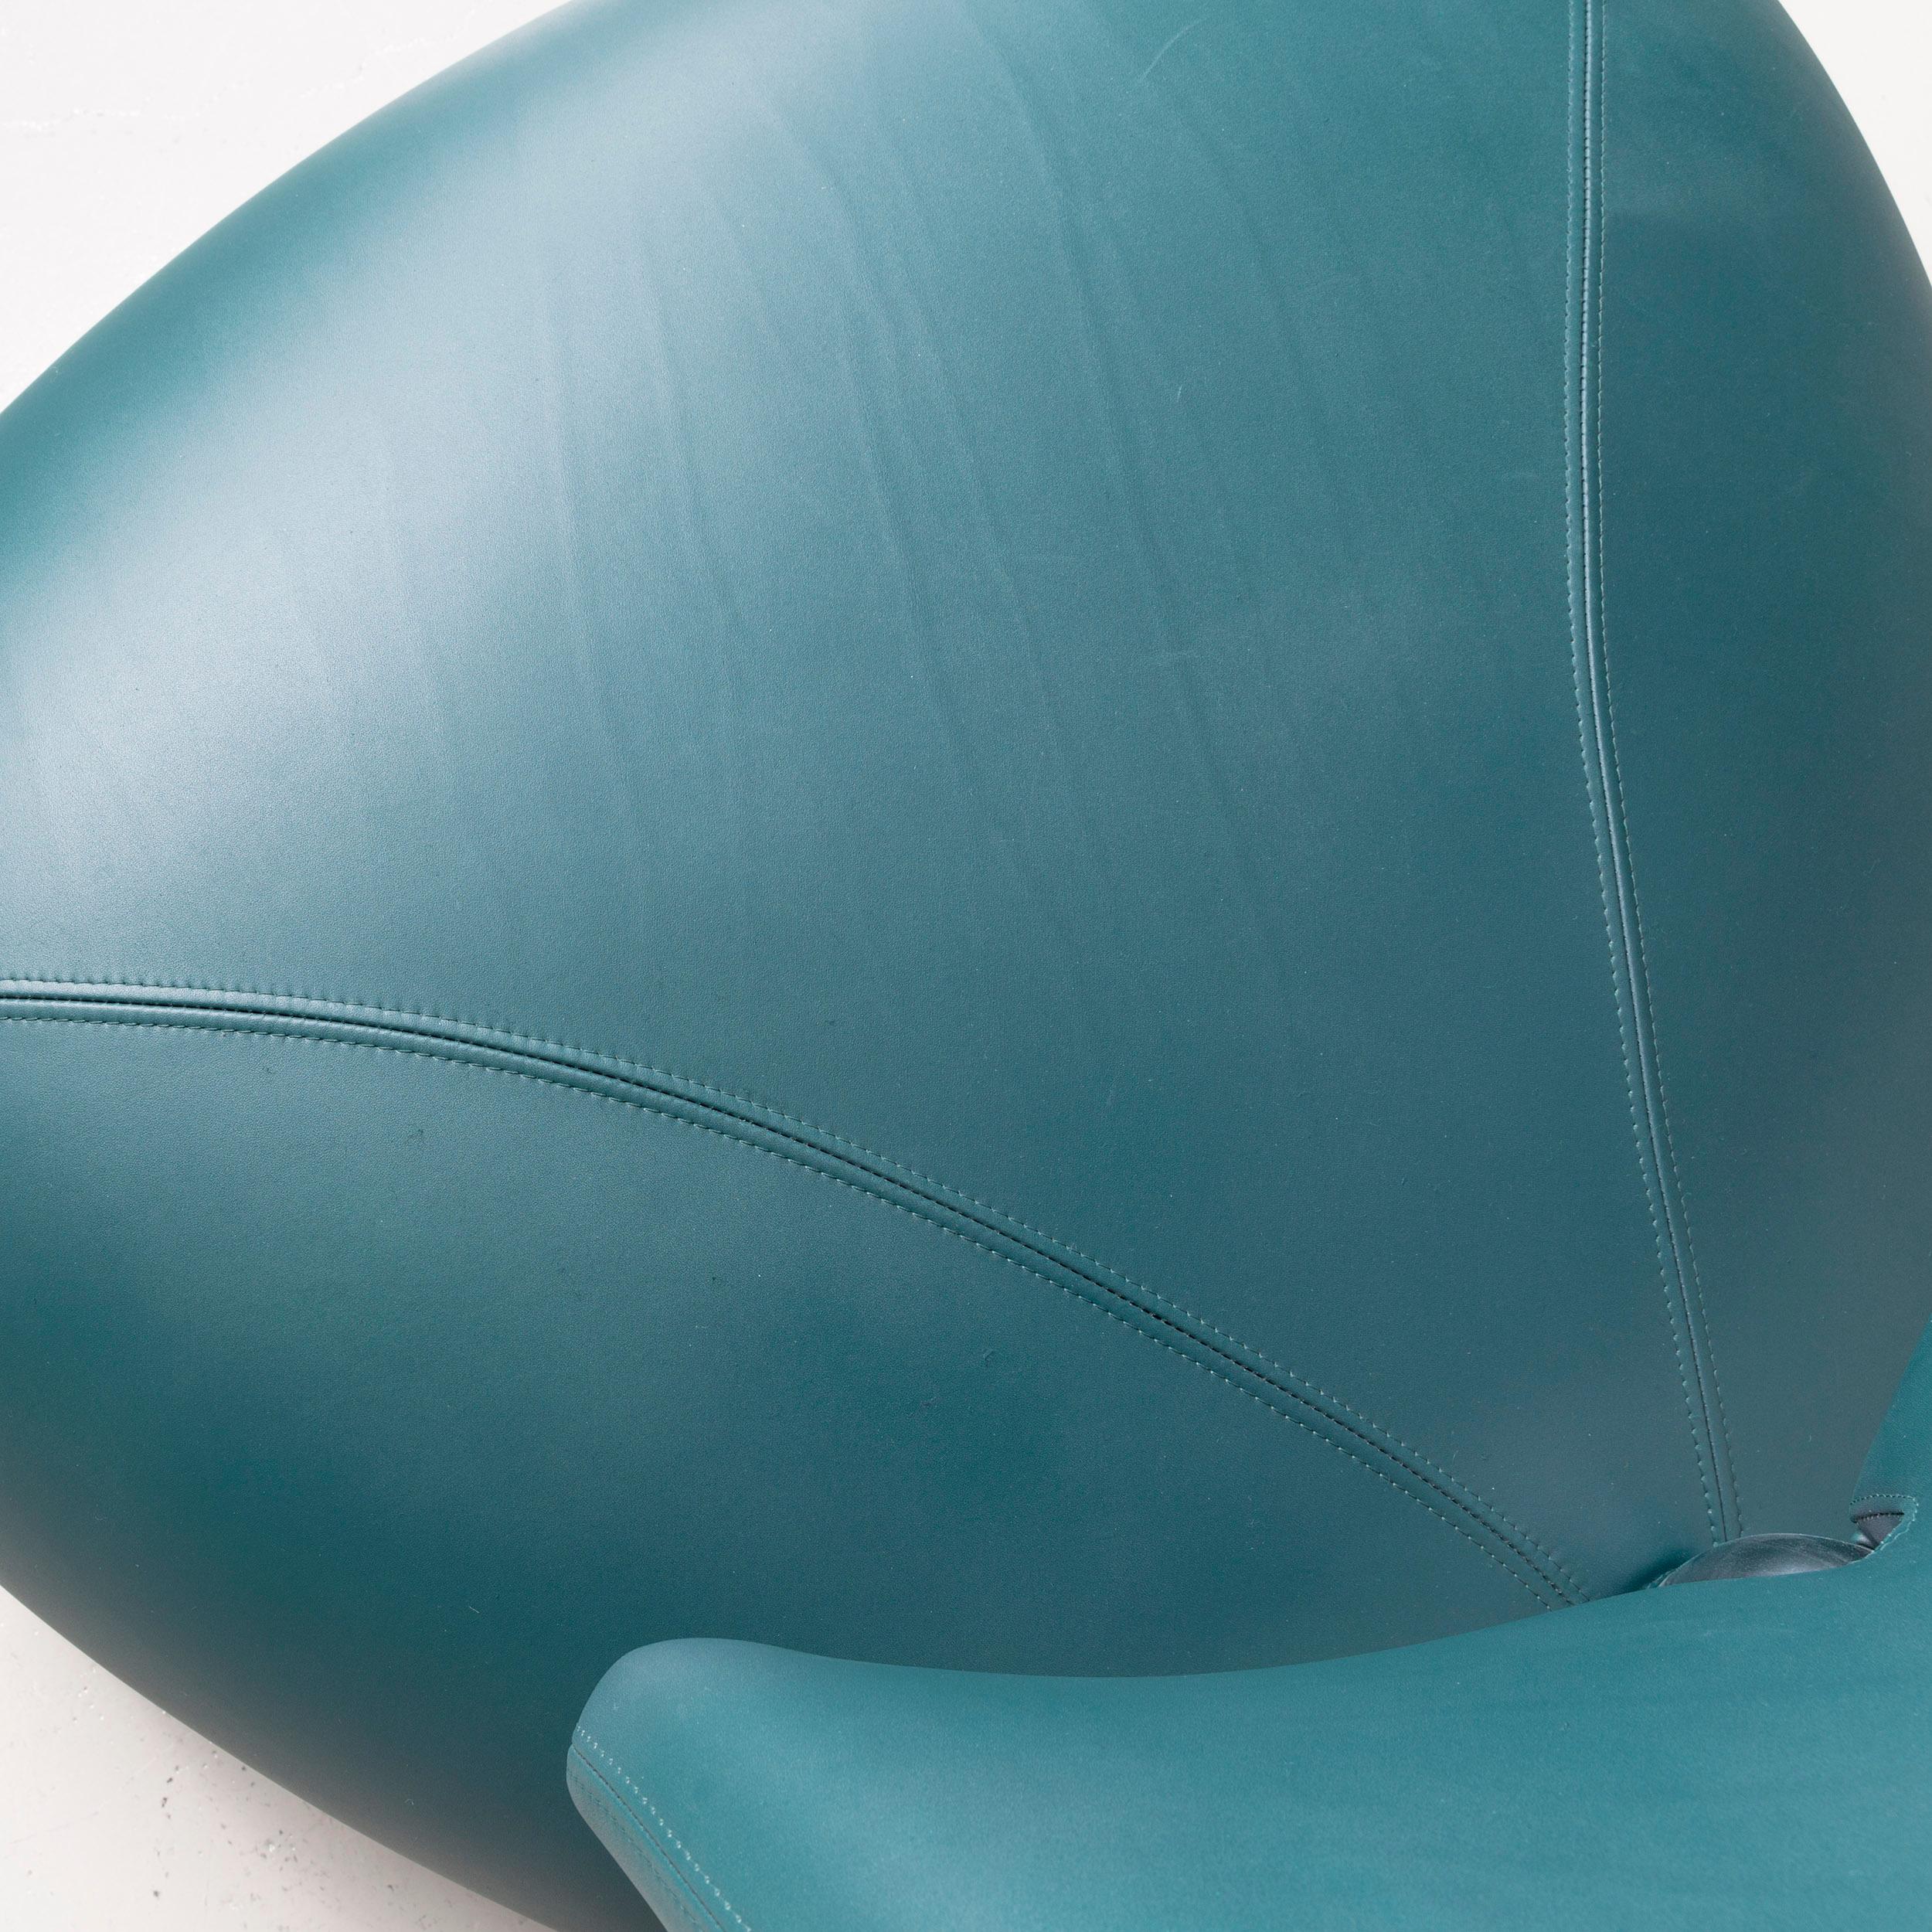 Leolux Pallone Pa Designer Chair Leather Green Modern In Excellent Condition For Sale In Cologne, DE